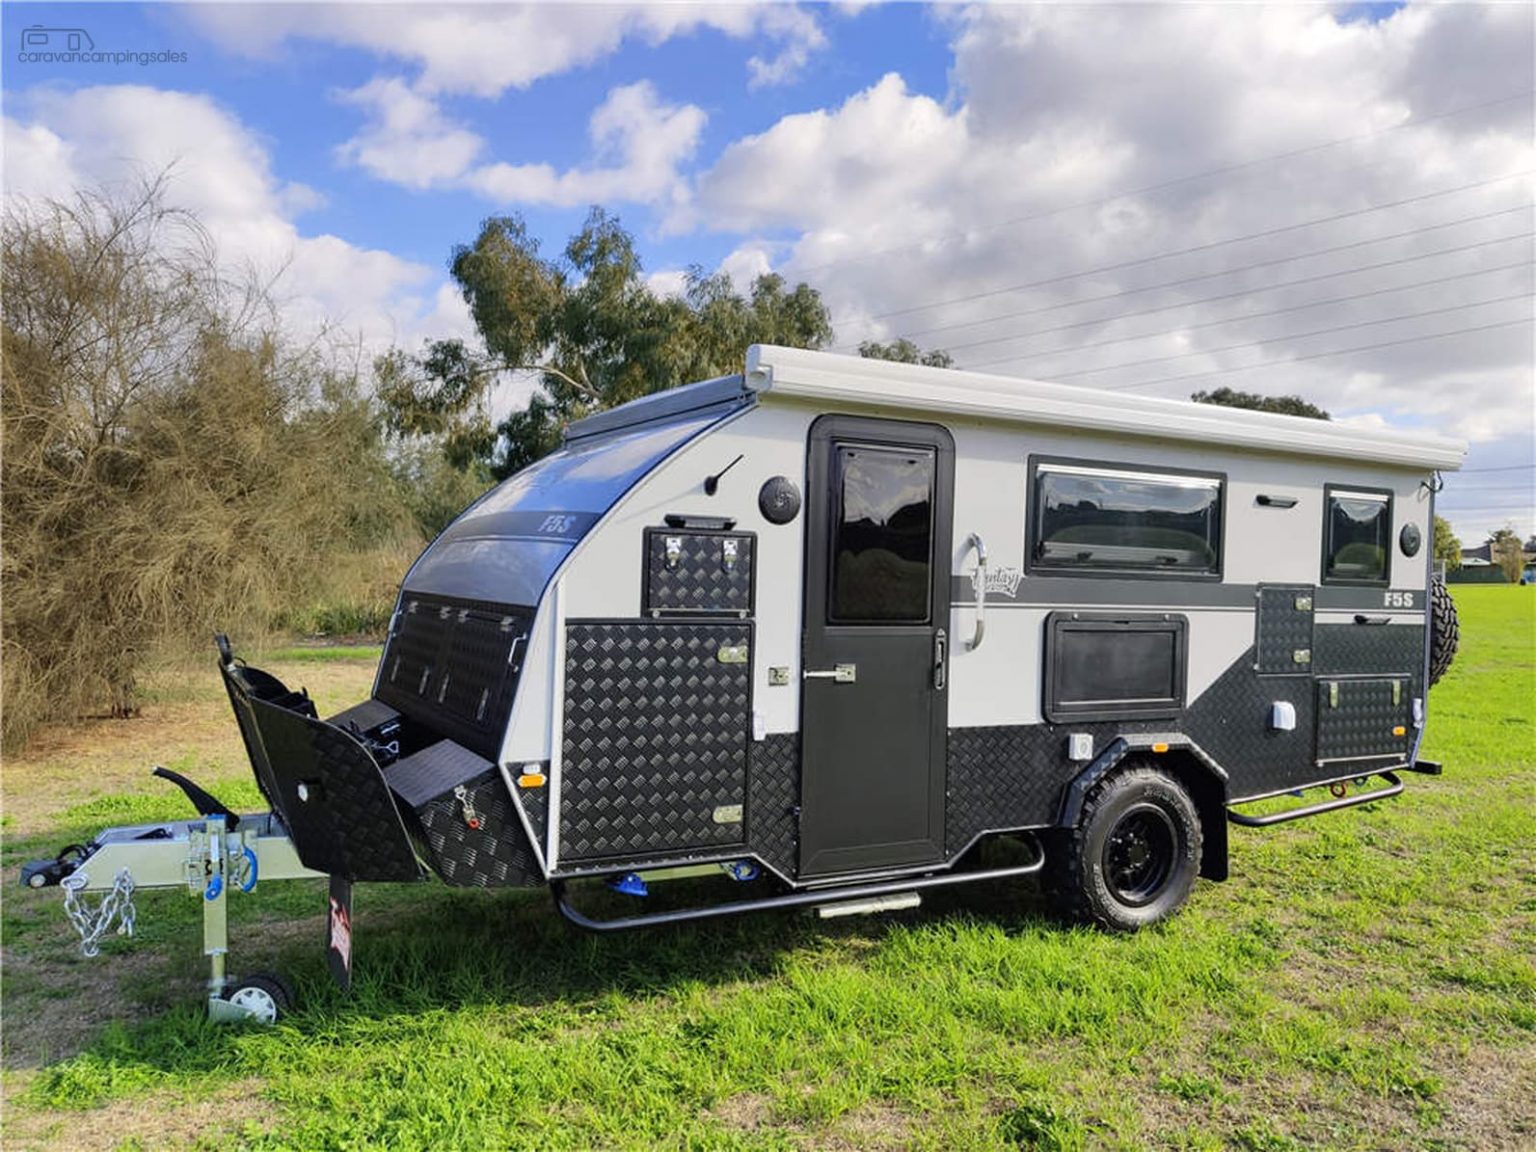 Is The Off Road Pop Top Caravans Are Worth To Invest? - Bikers 4 Life Blog